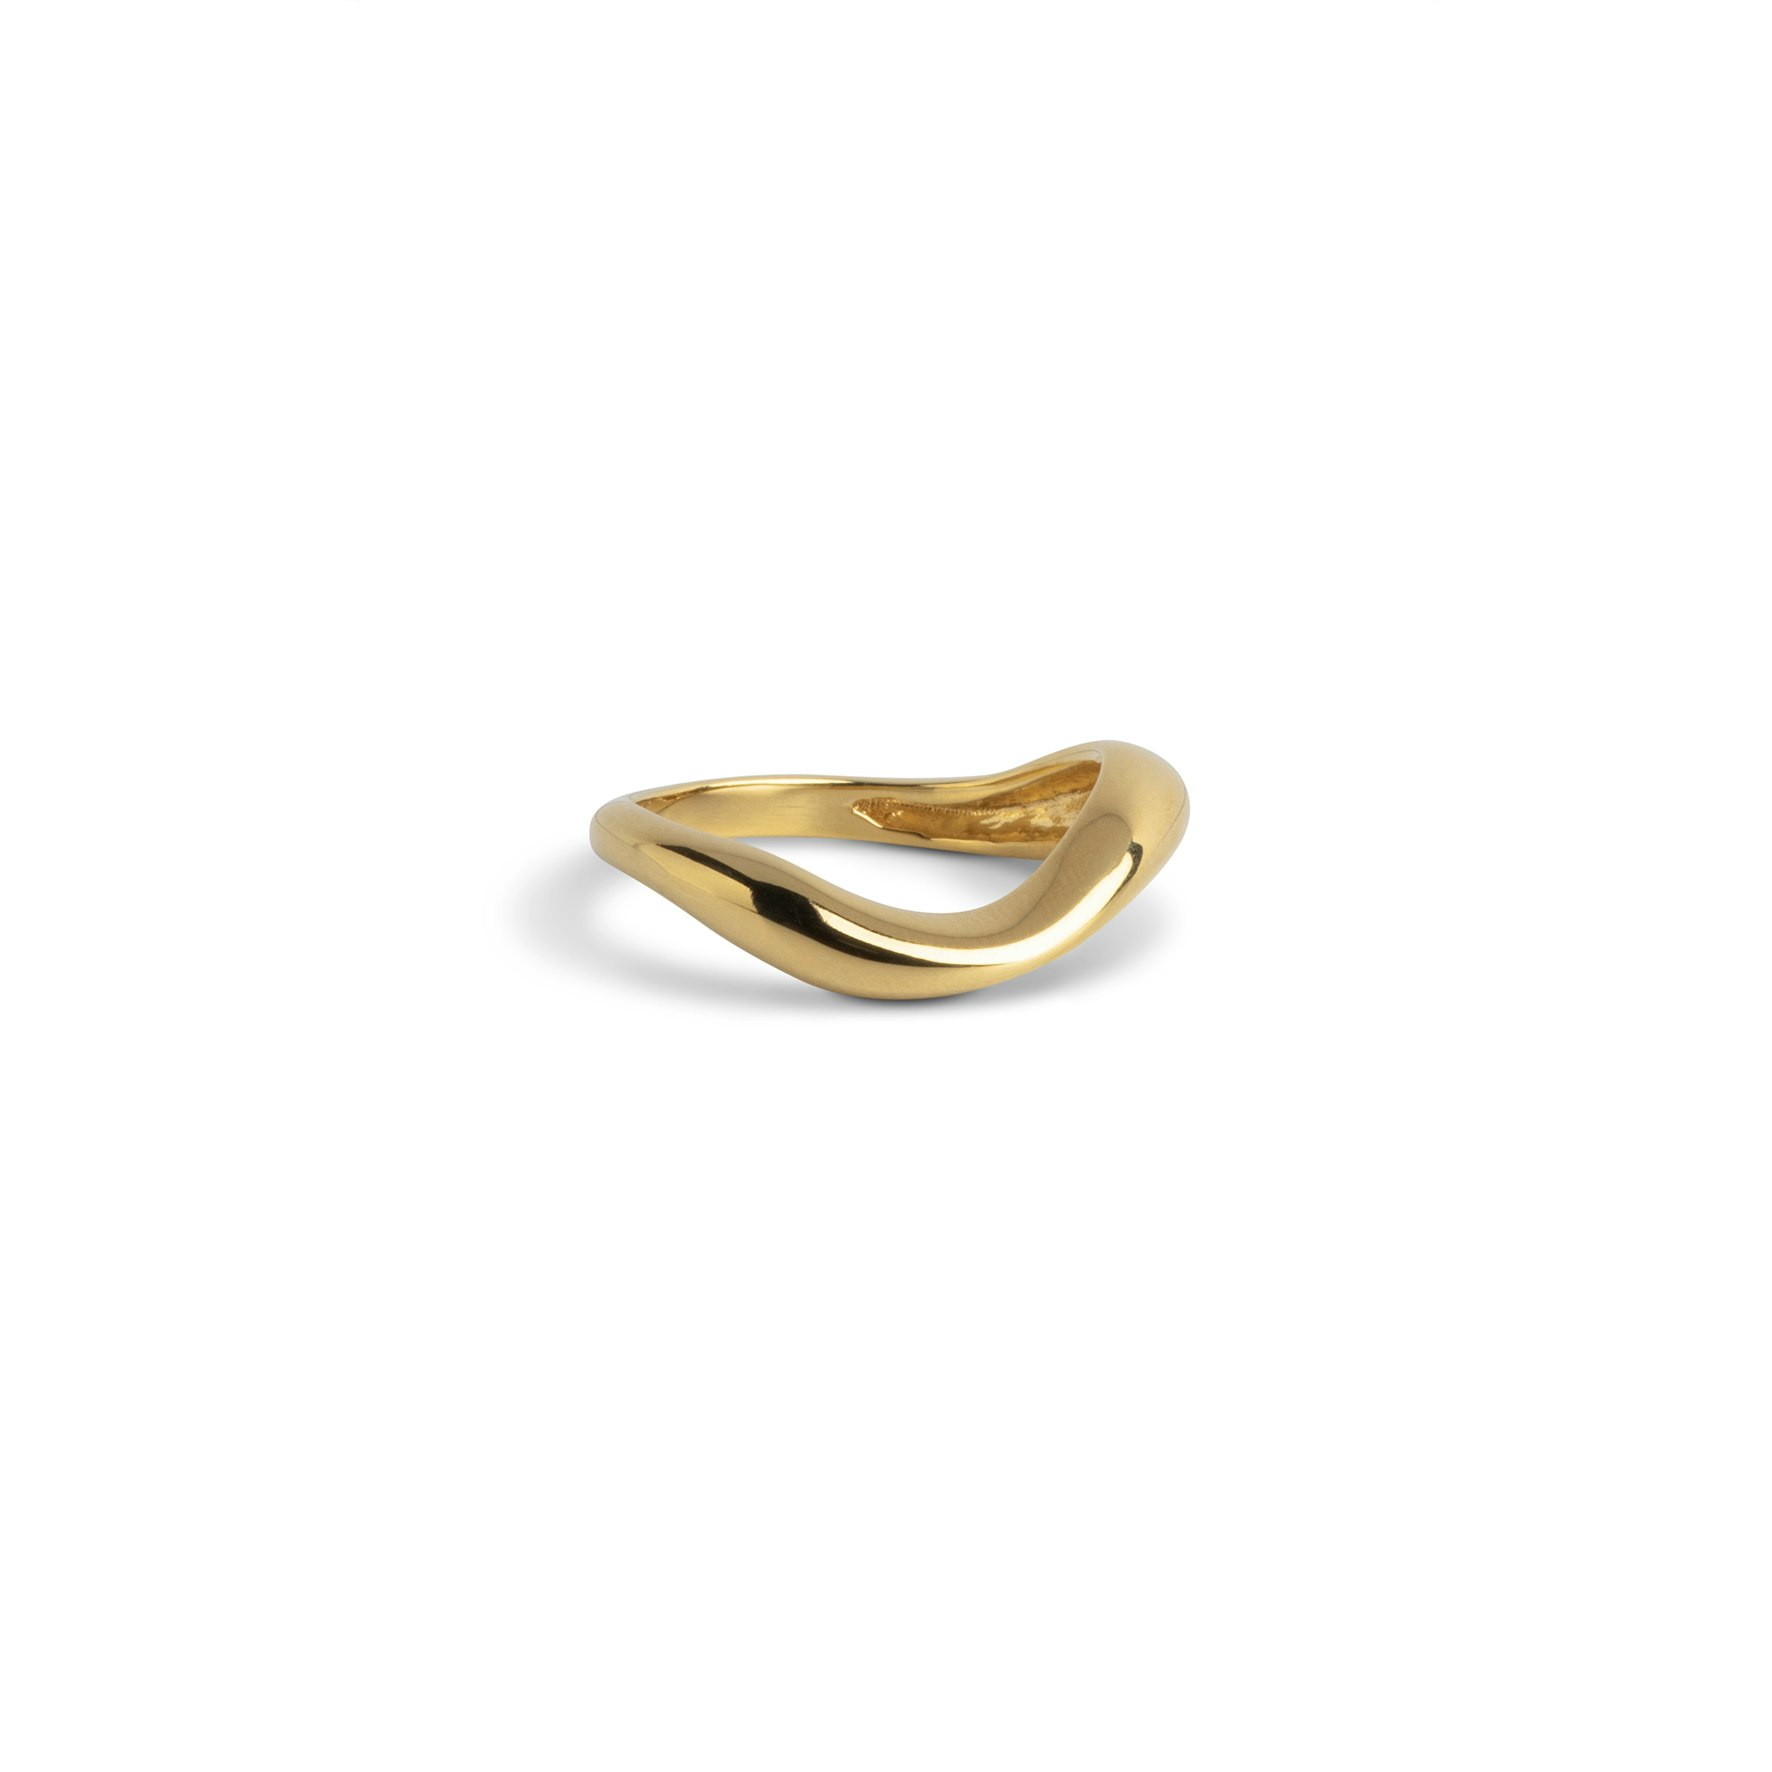 Agnete Small Ring from Enamel Copenhagen in Goldplated Silver Sterling 925